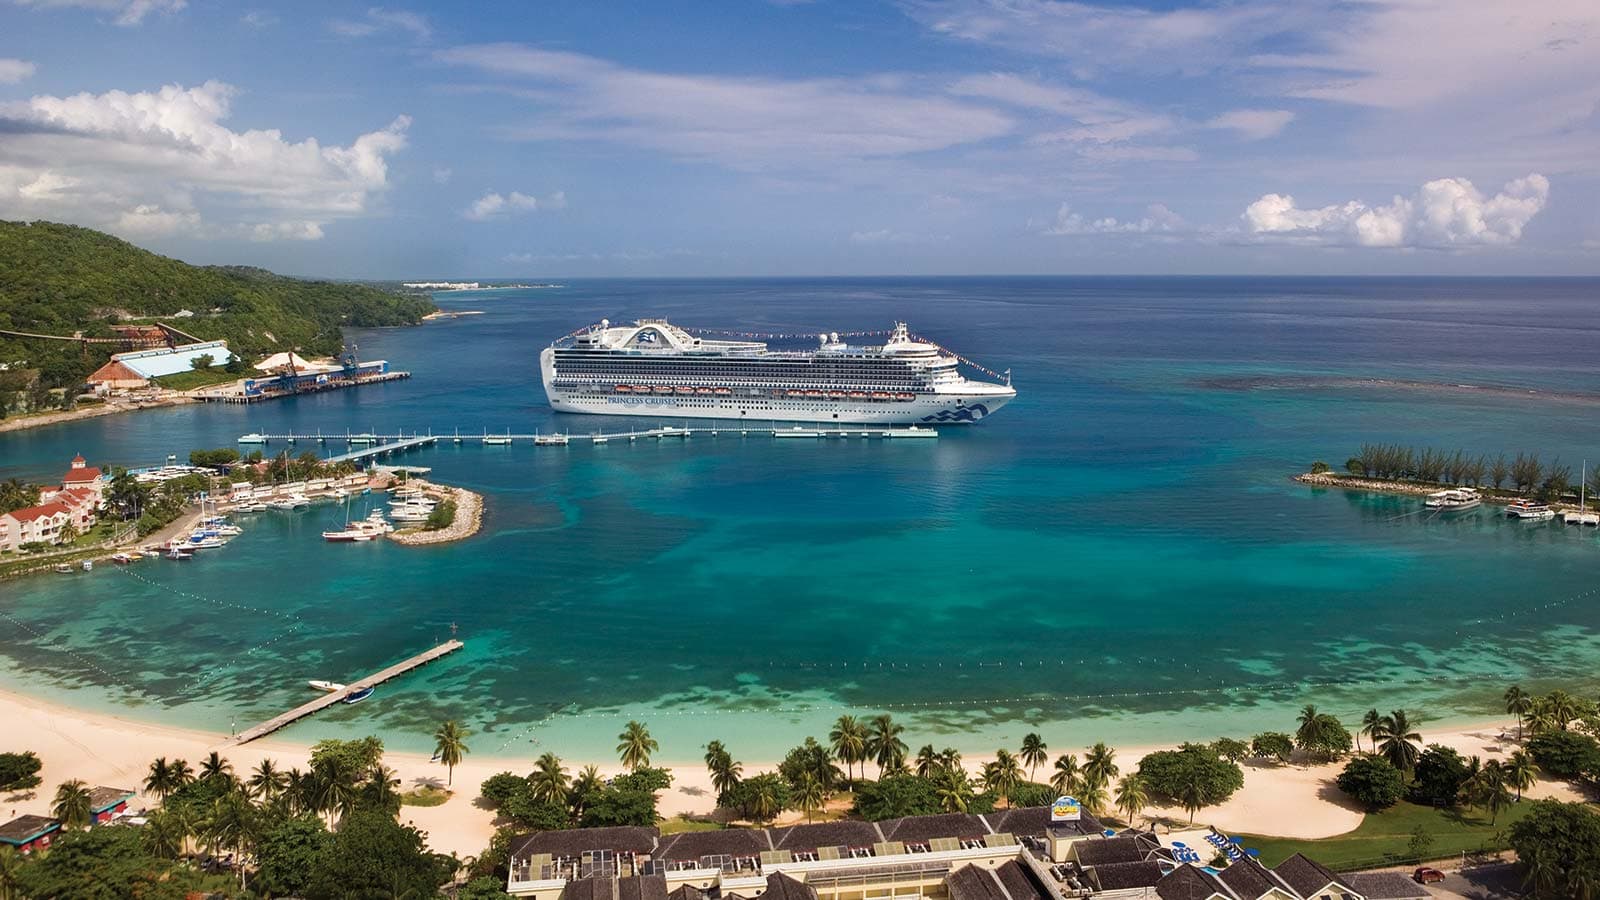 Best Time to Go on a Caribbean Cruise